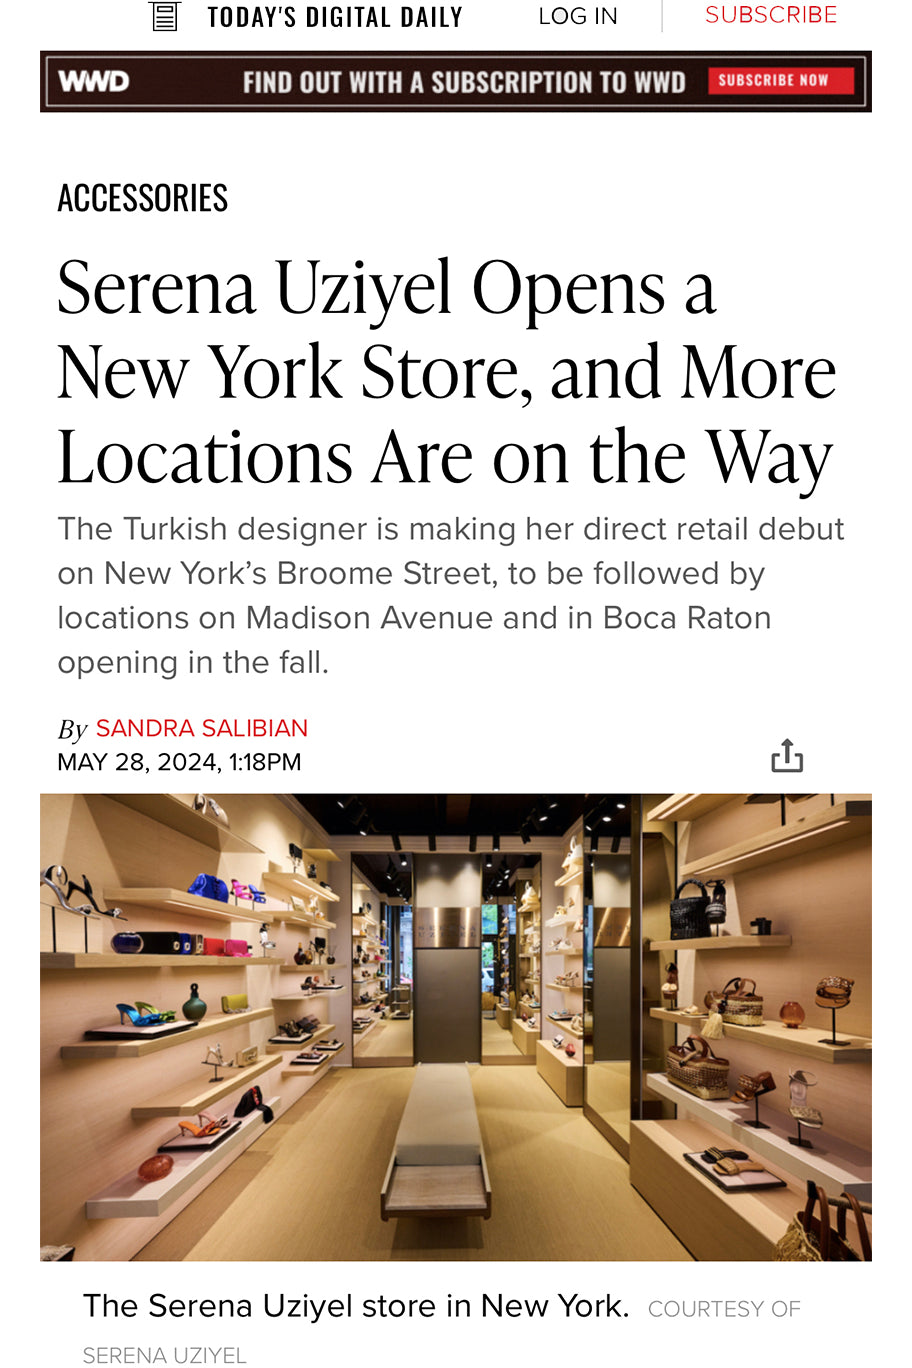 Serena Uziyel Broome Store is featured in WWD